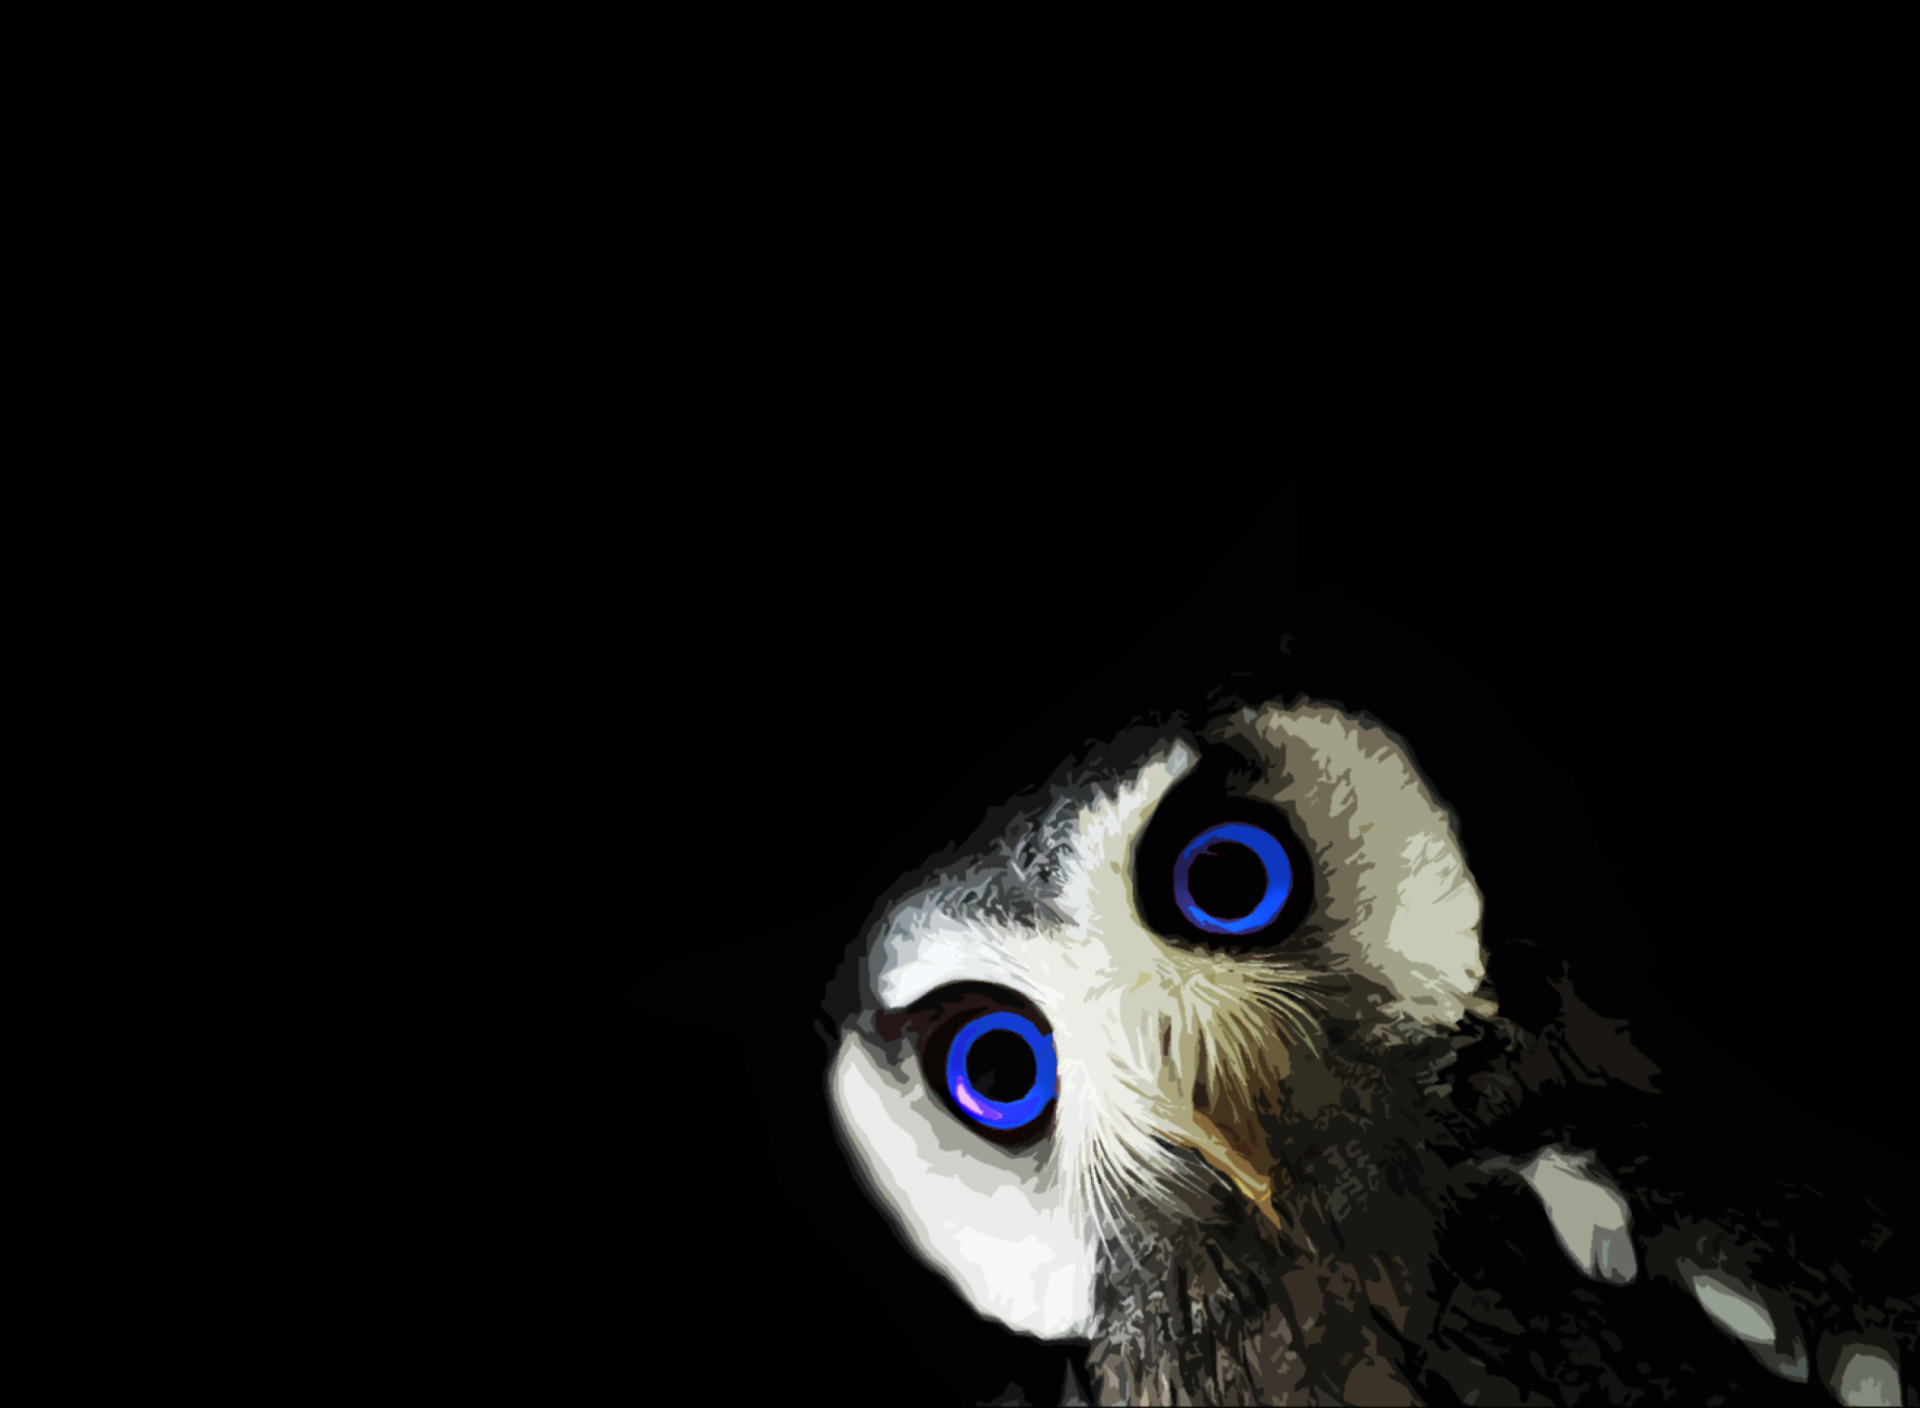 Funny Owl With Big Blue Eyes wallpaper 1920x1408